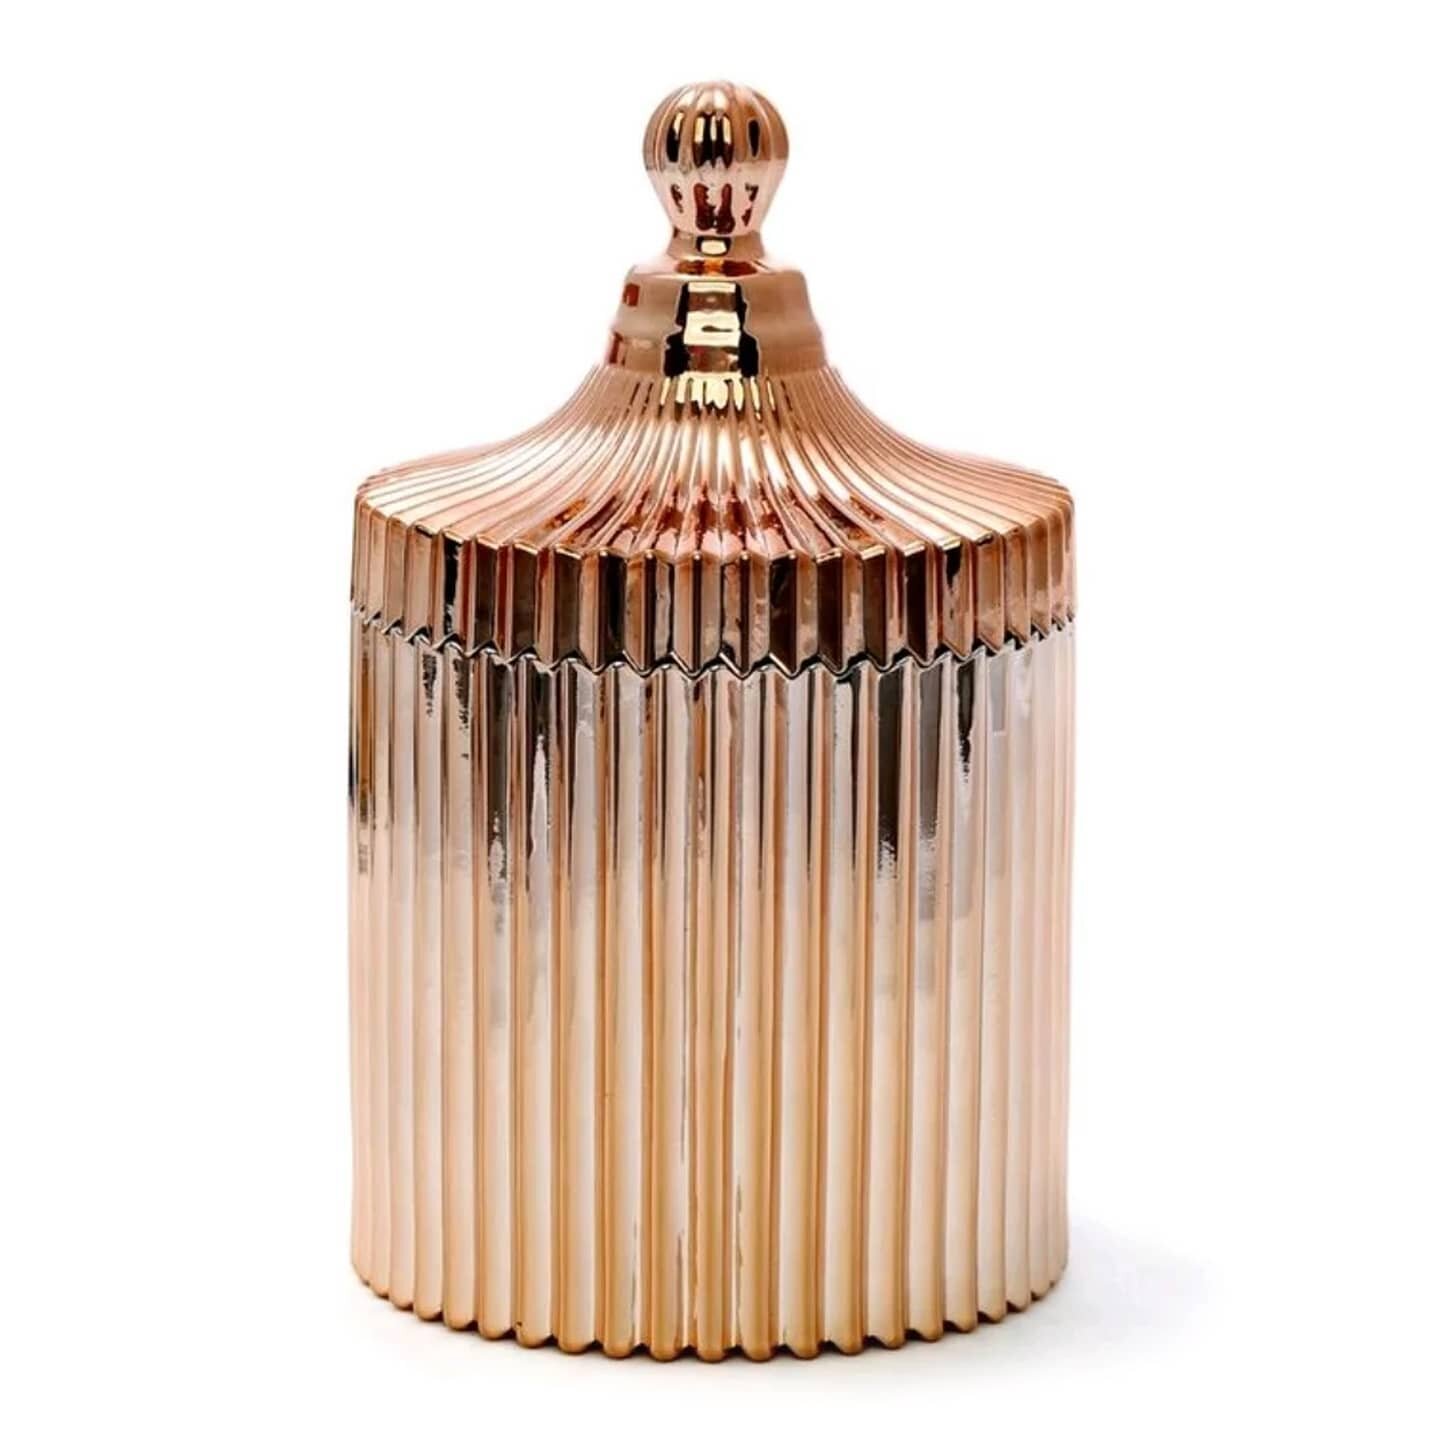 Large ridged vintage in rose gold. Unfortunately these are now out of stock but more are in production right now, all being well they will be back with us by the end of October. These beautiful vessels hold a massive 500ml of wax.
#TCJC #vesselspecia